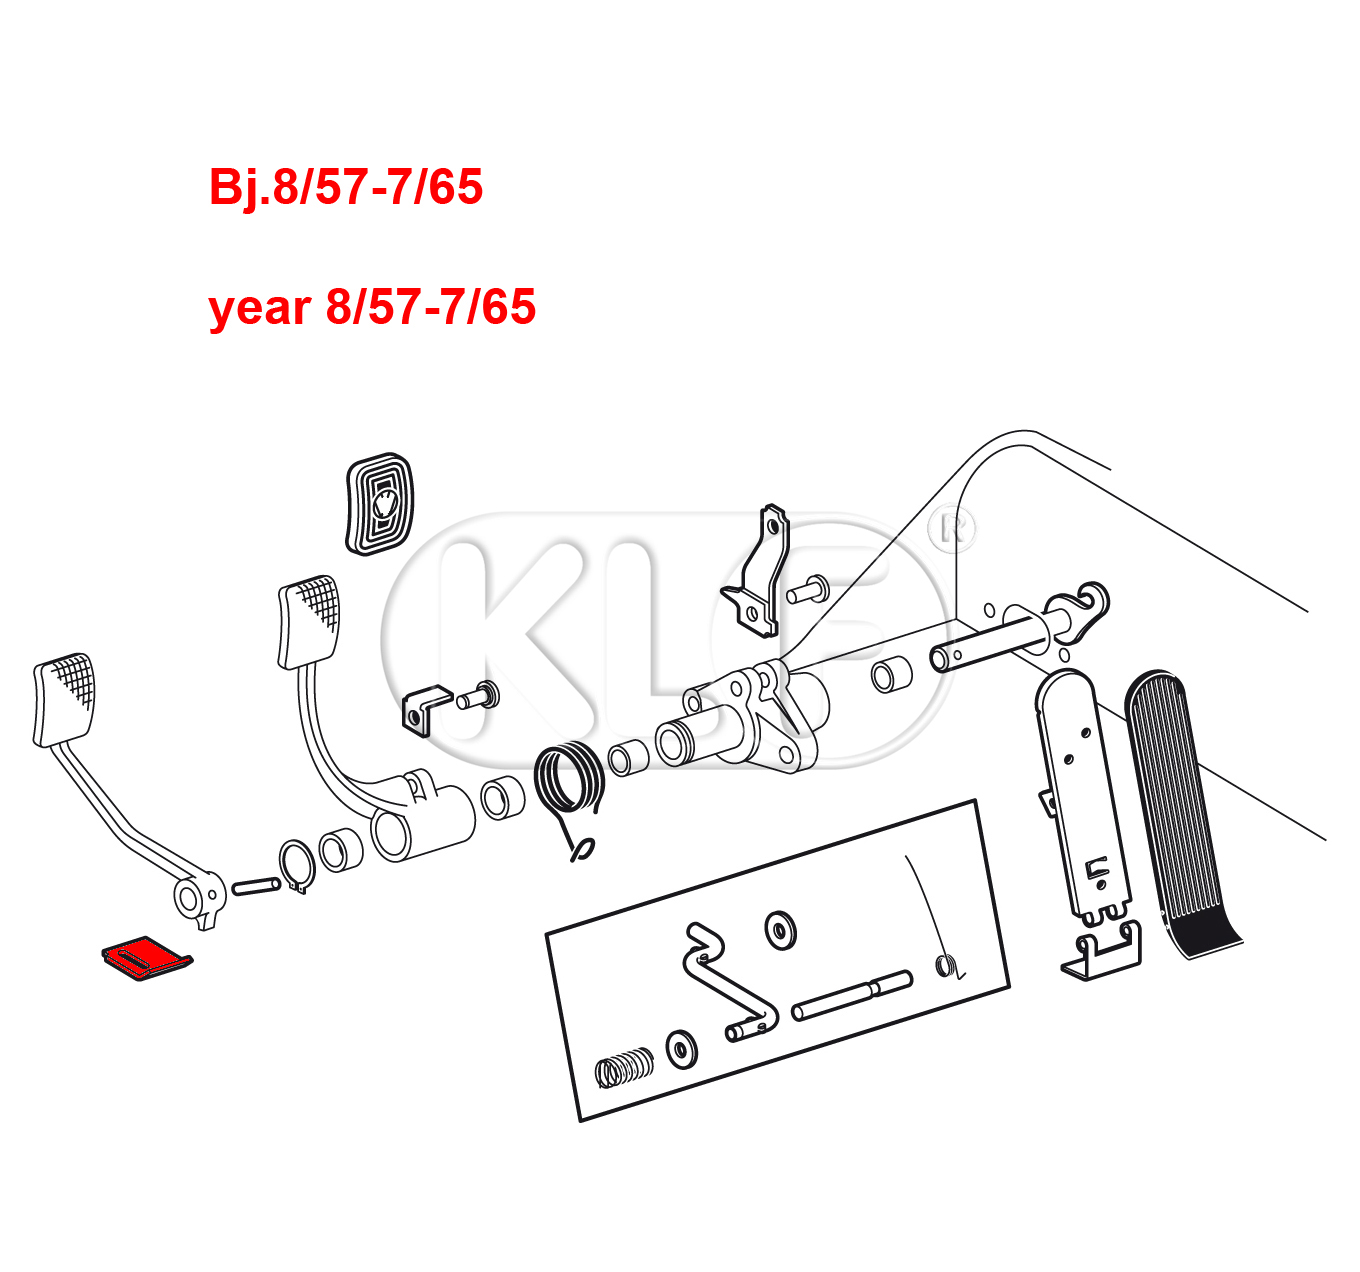 Stop Plate, year Bj. 08/57 - 1966 (through chassis 116460613)